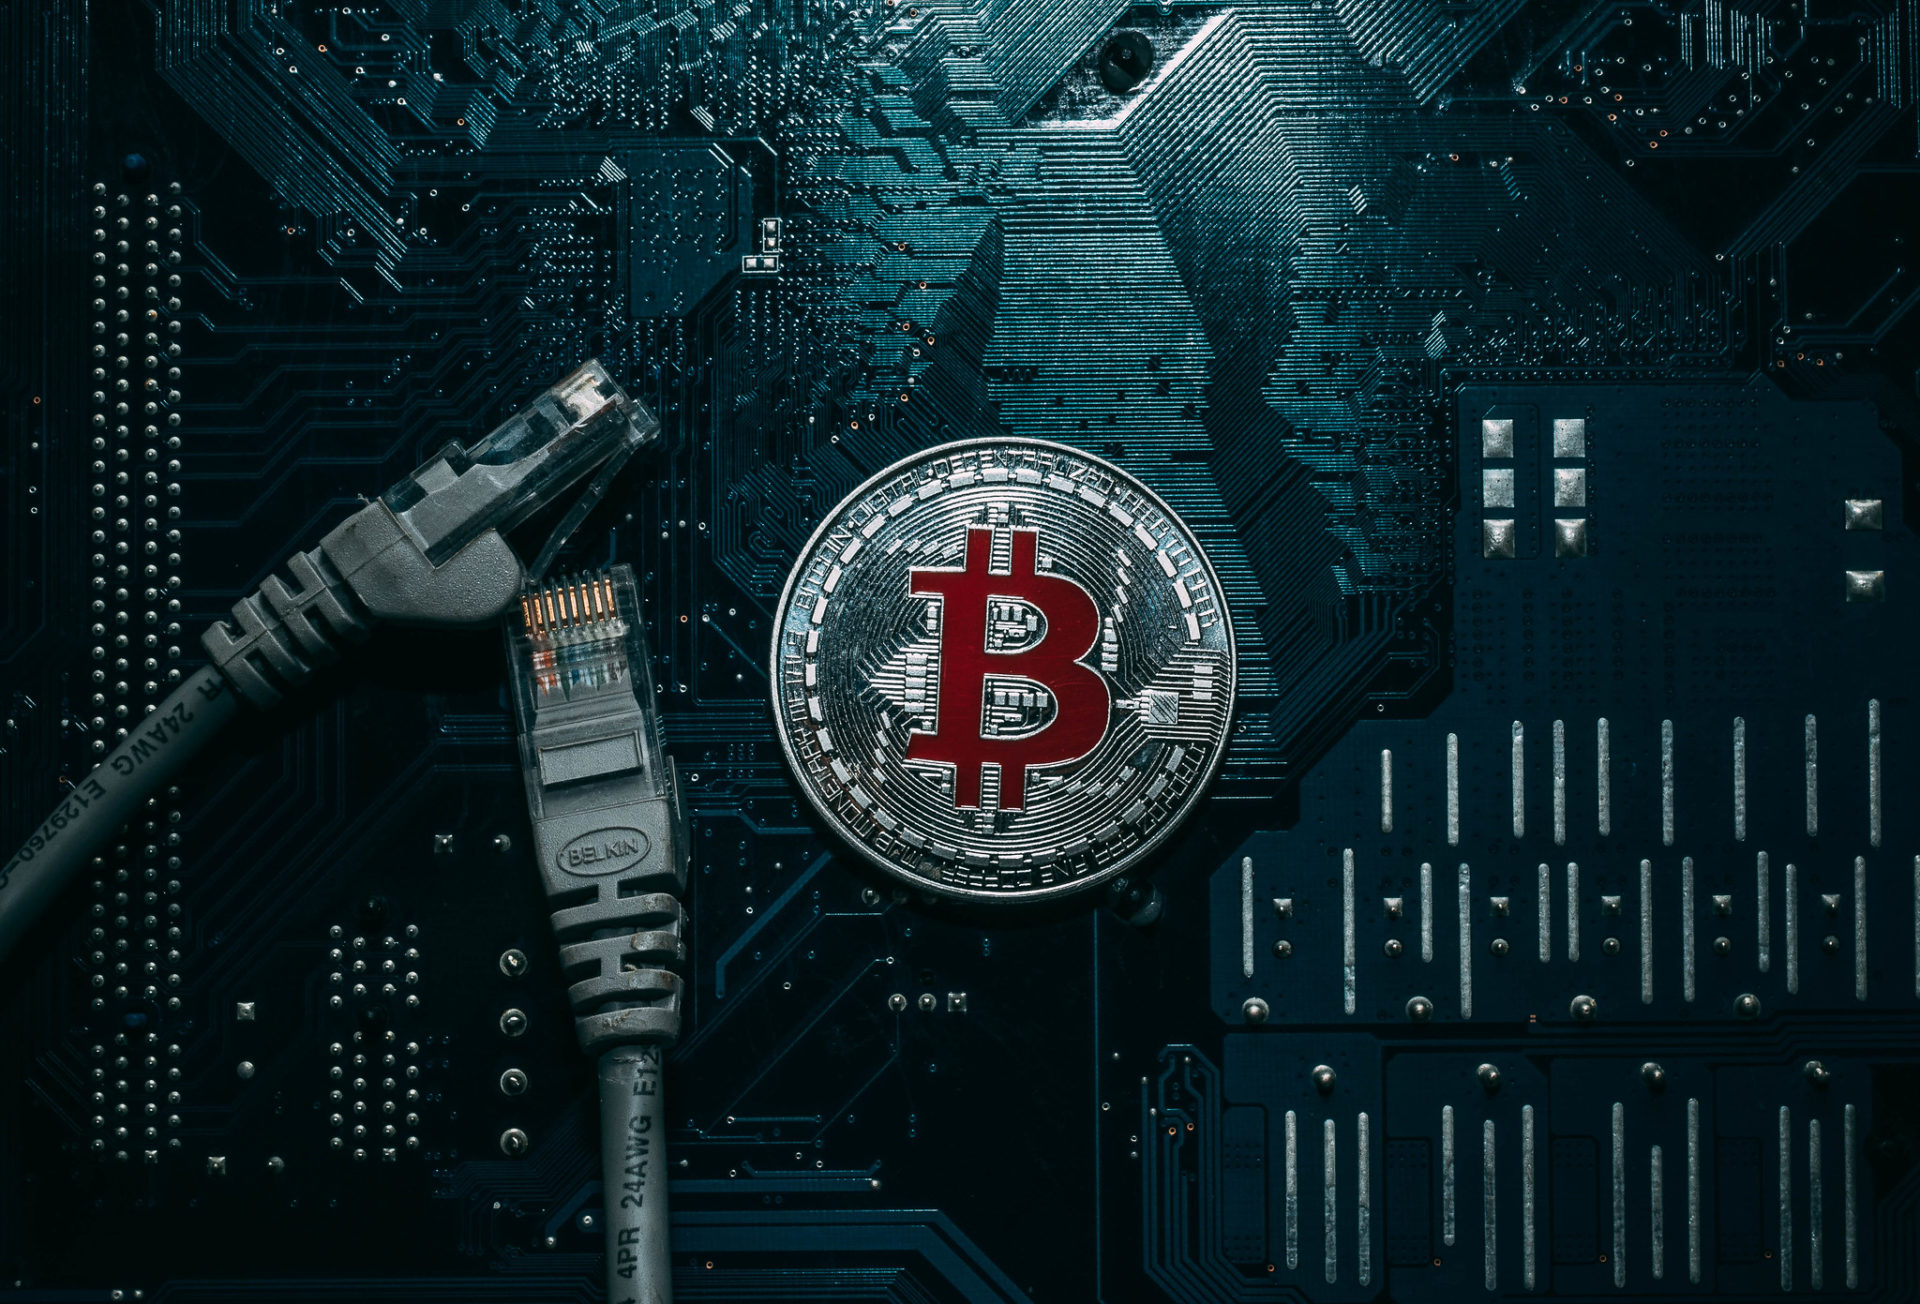 Indicator Suggests Bitcoin (BTC) Needs To Correct, But Don't Worry 10